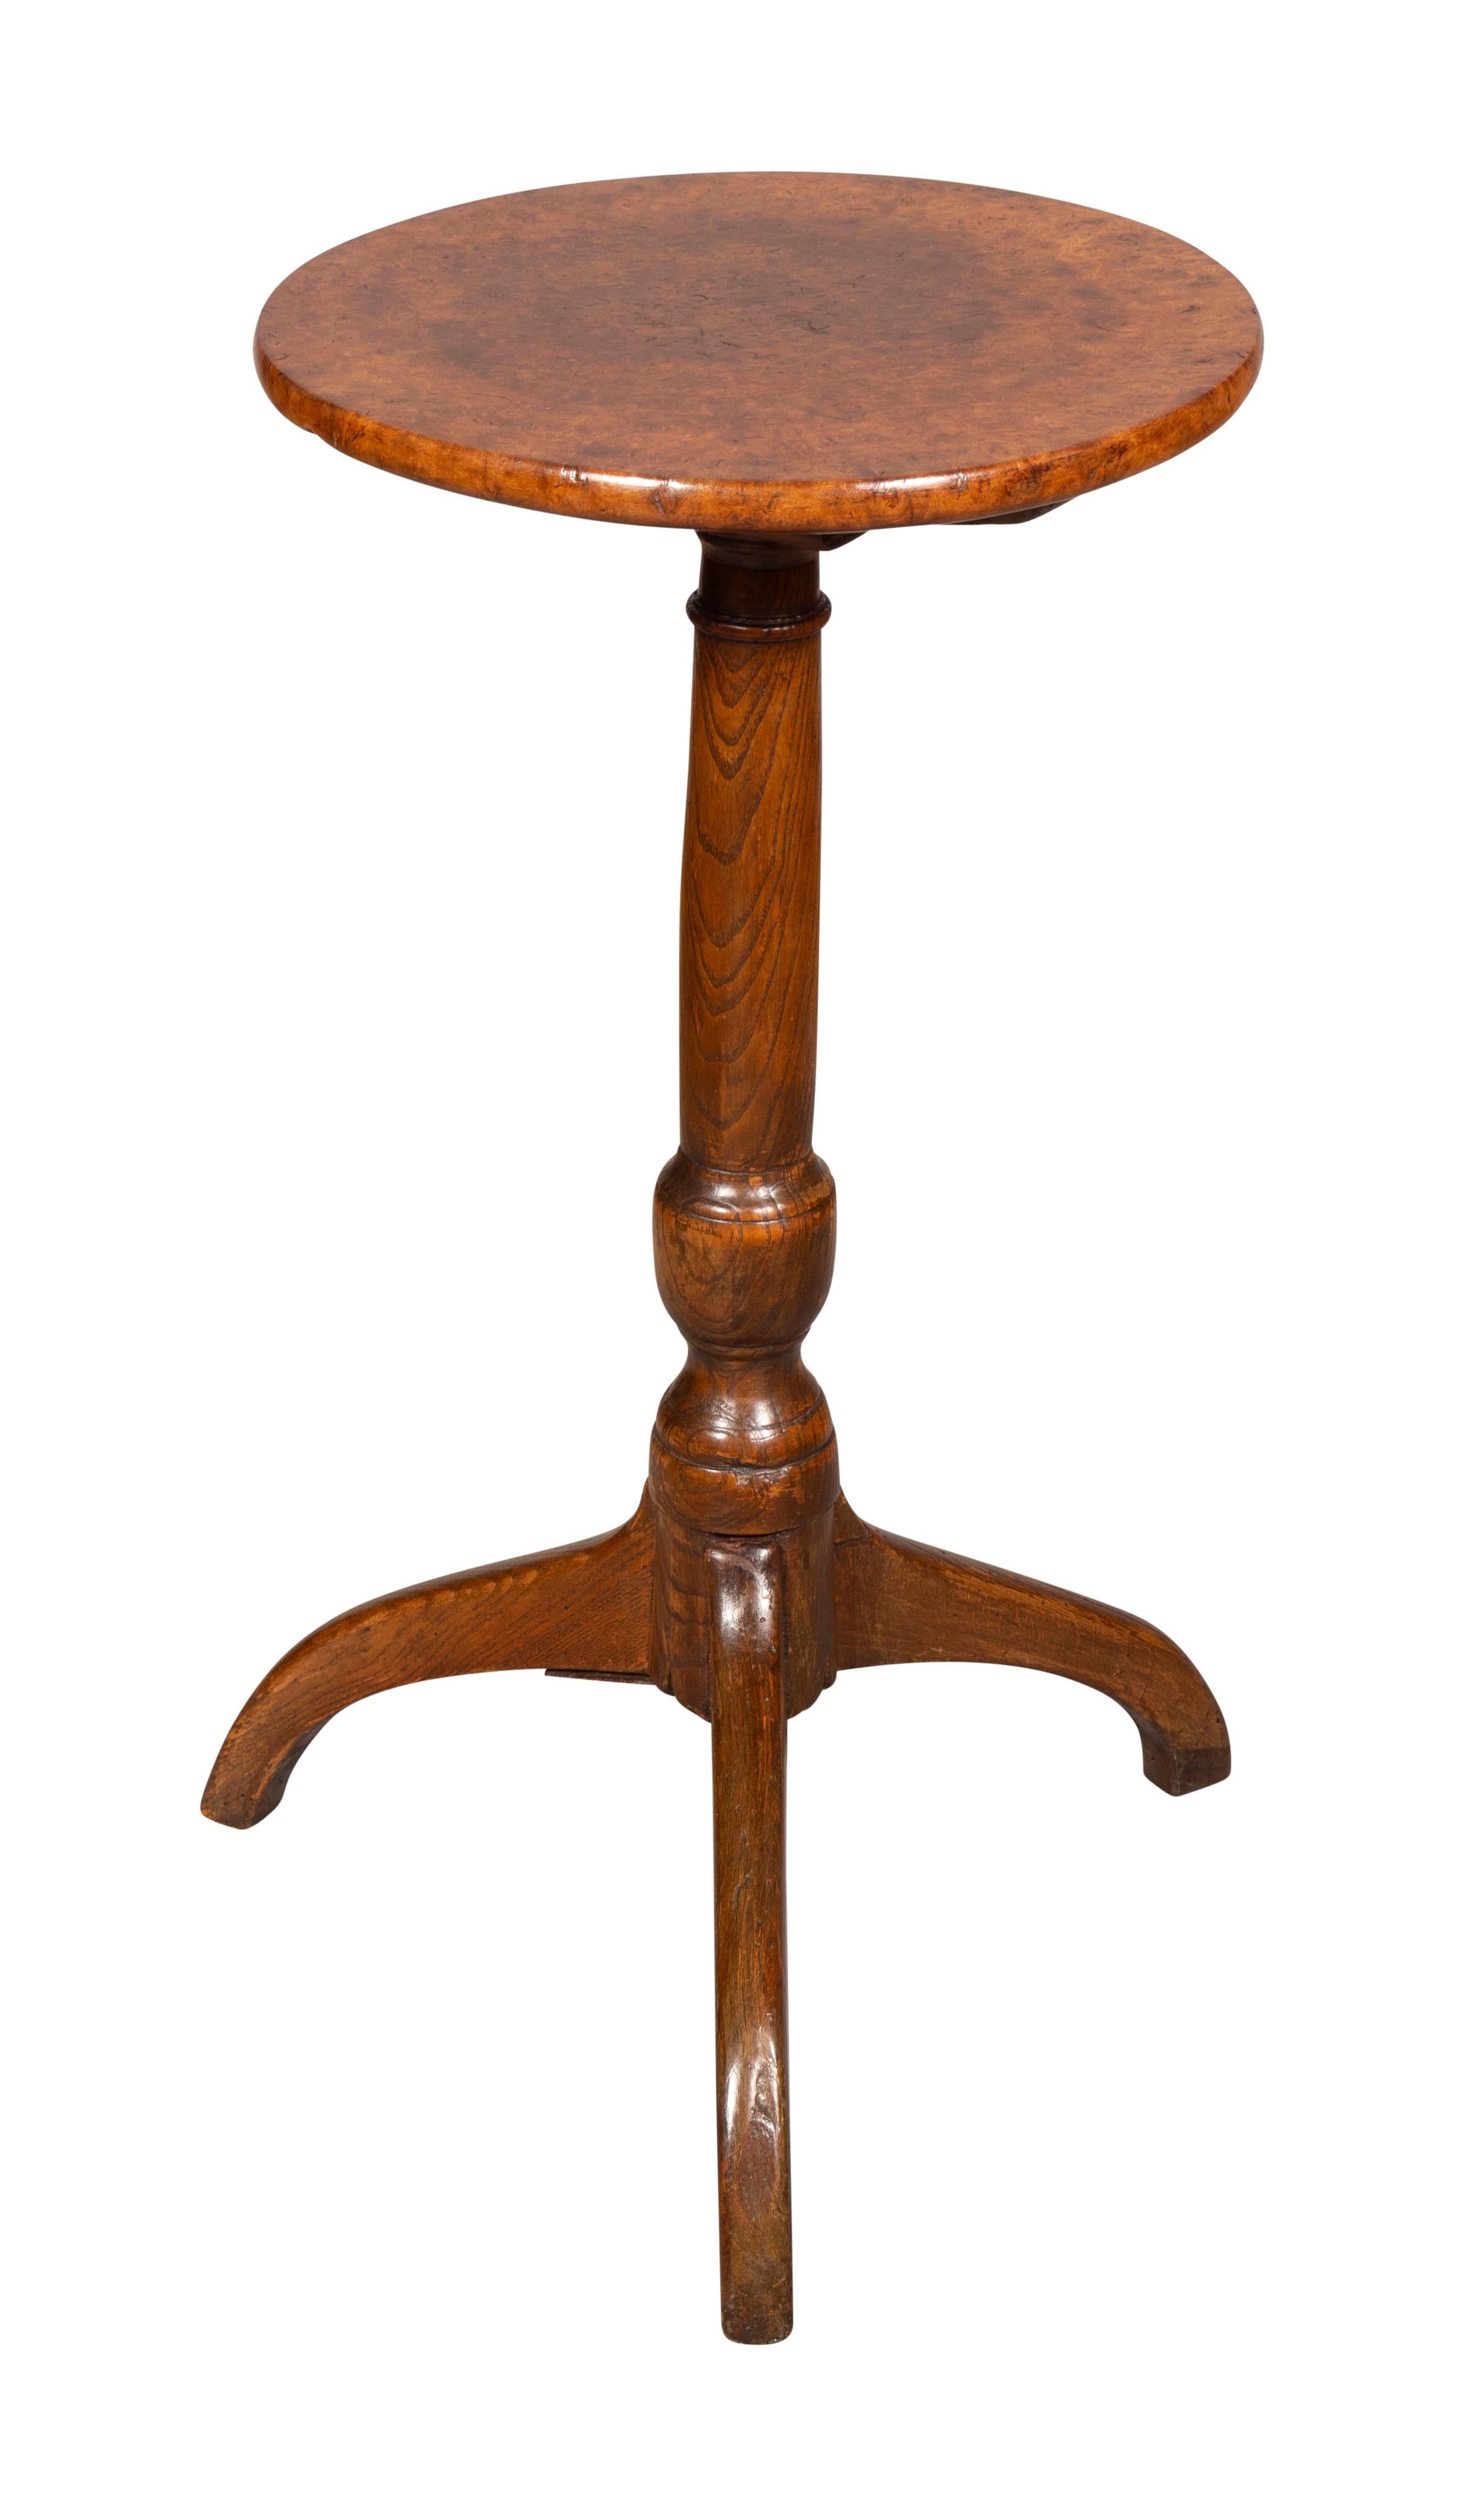 With a circular top with fine tight walnut burl over a turned post joined by a tripartite base.